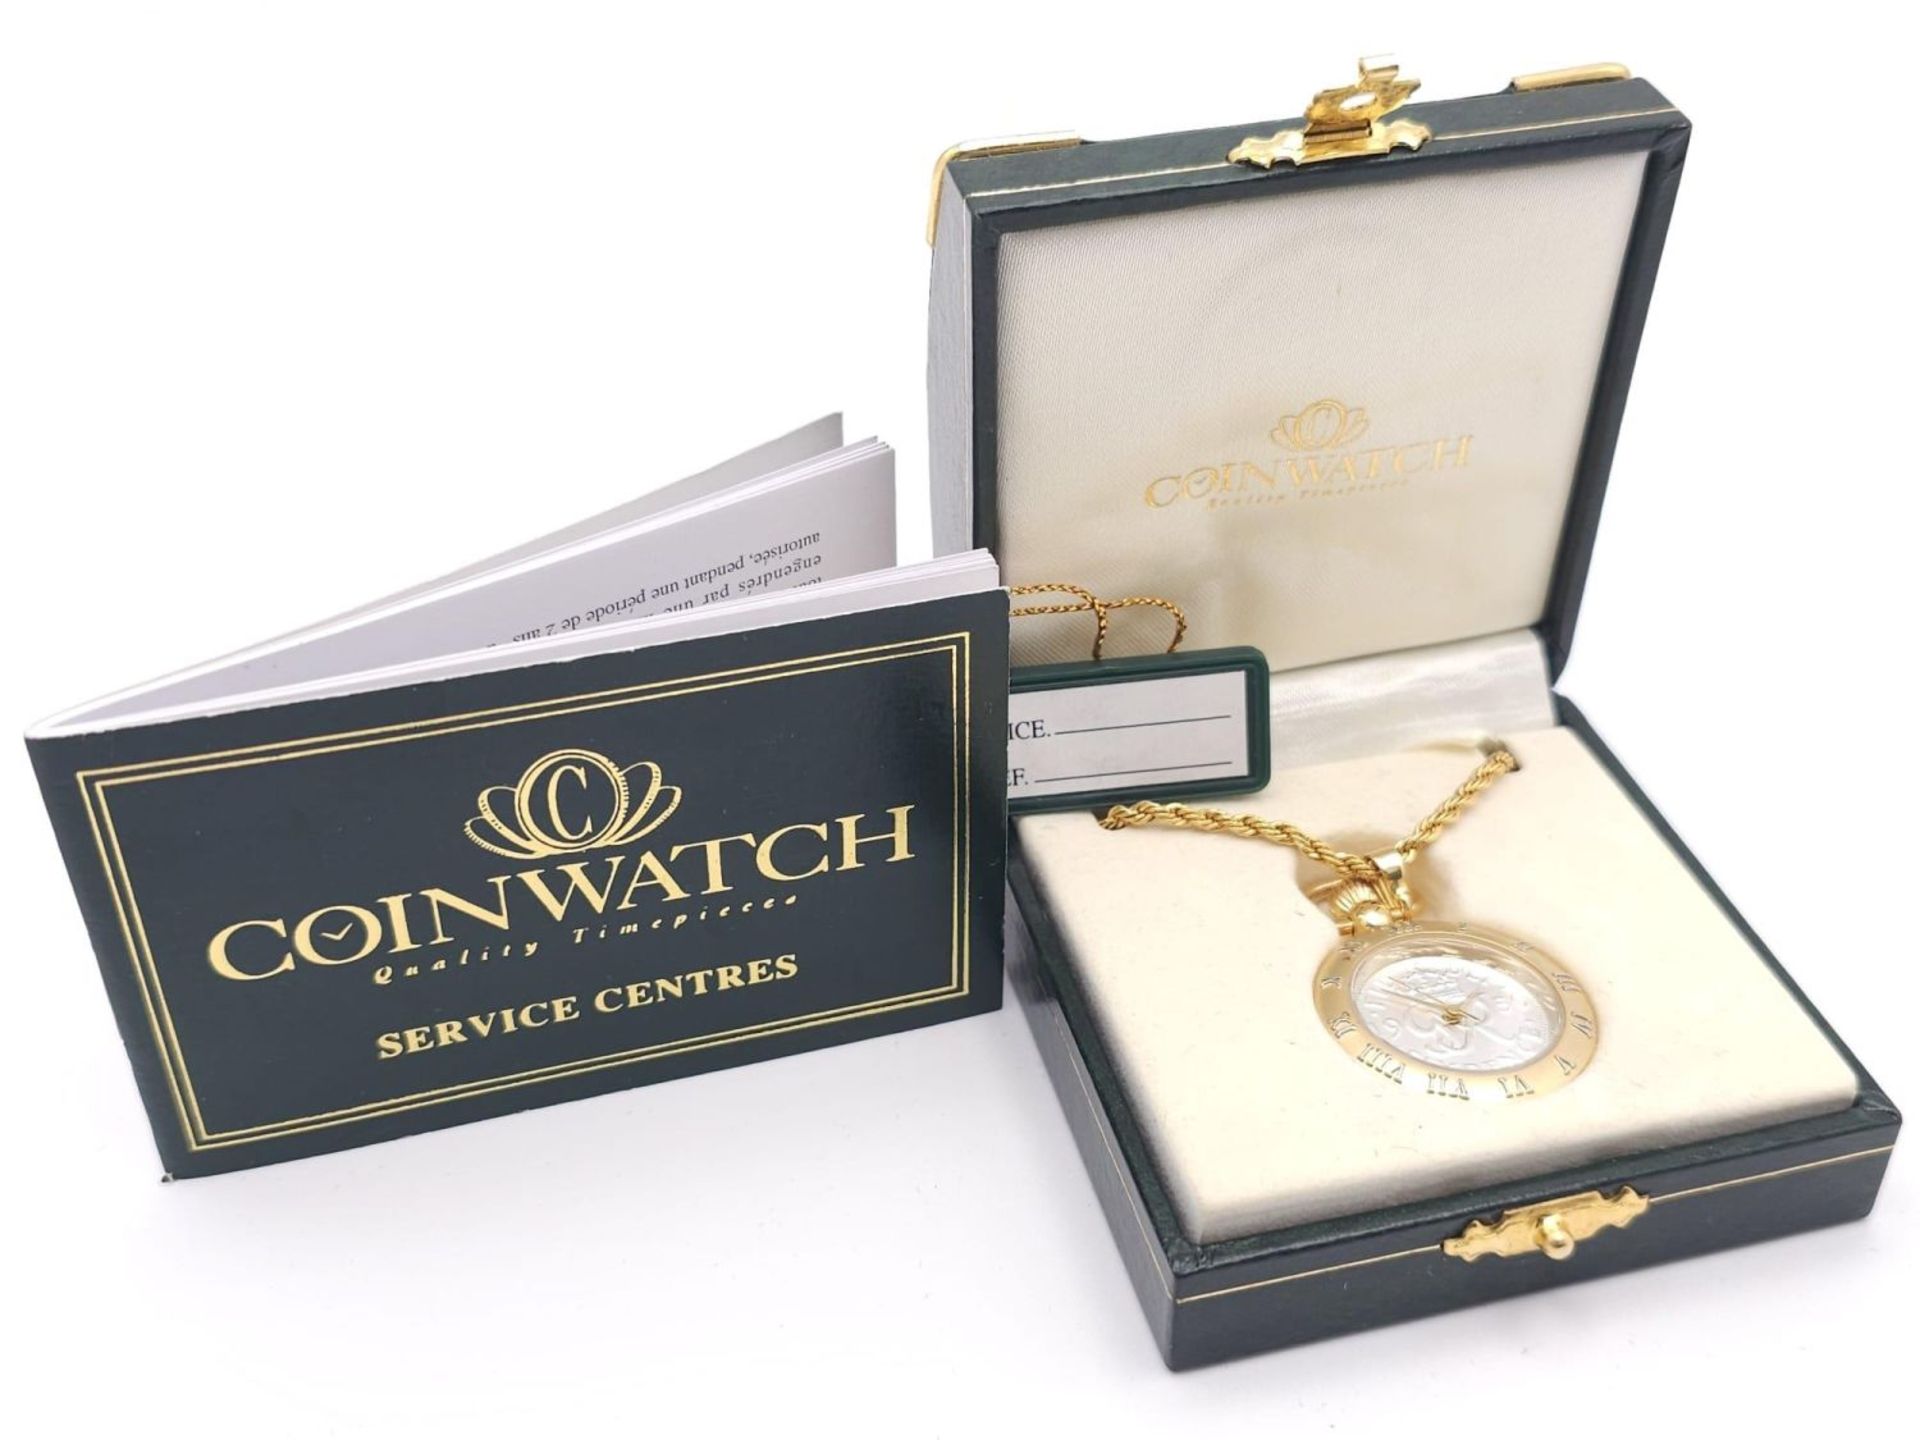 A BRAND NEW "COINWATCH" WITH 2 YEAR GUARANTEE . A PENDANT WATCH WITH A GENUINE COIN AS THE DIAL , - Bild 5 aus 18